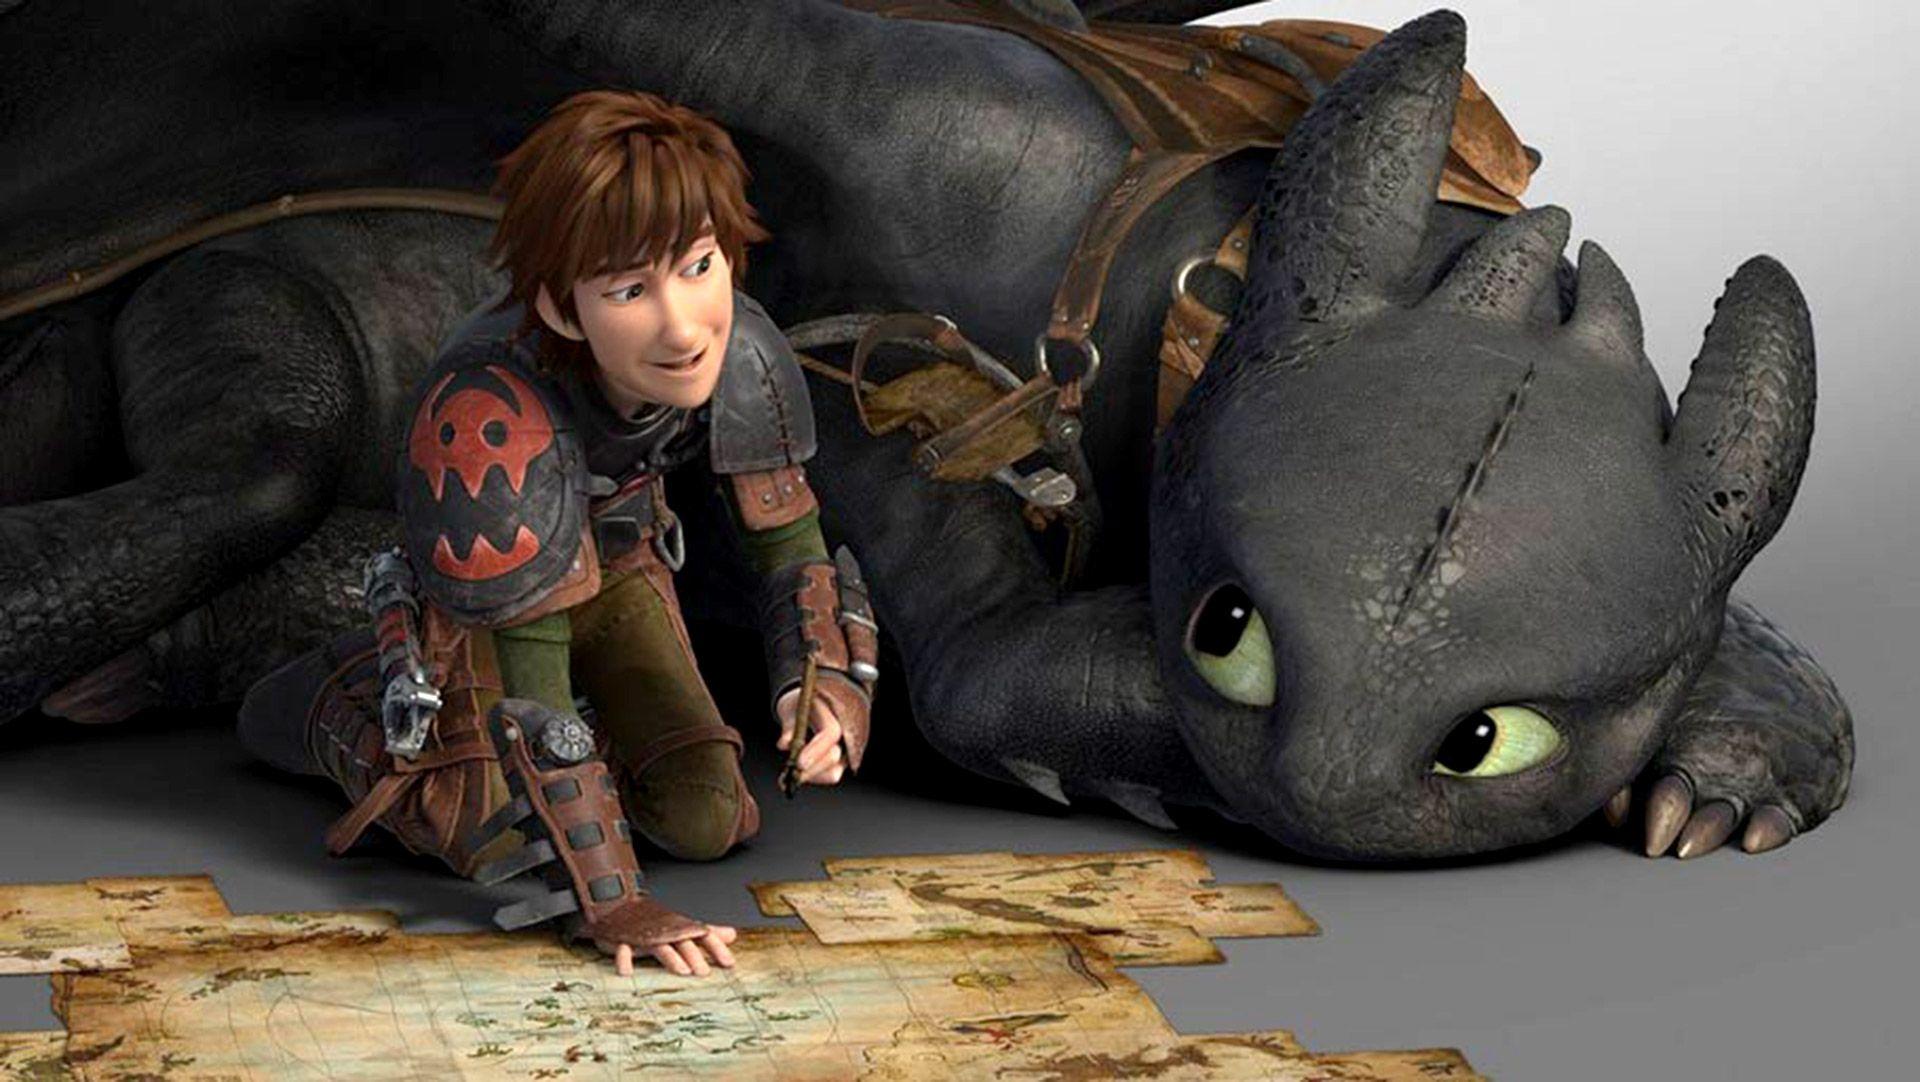 How To Train Your Dragon 2 Toothless HD Wallpaper, Background Image